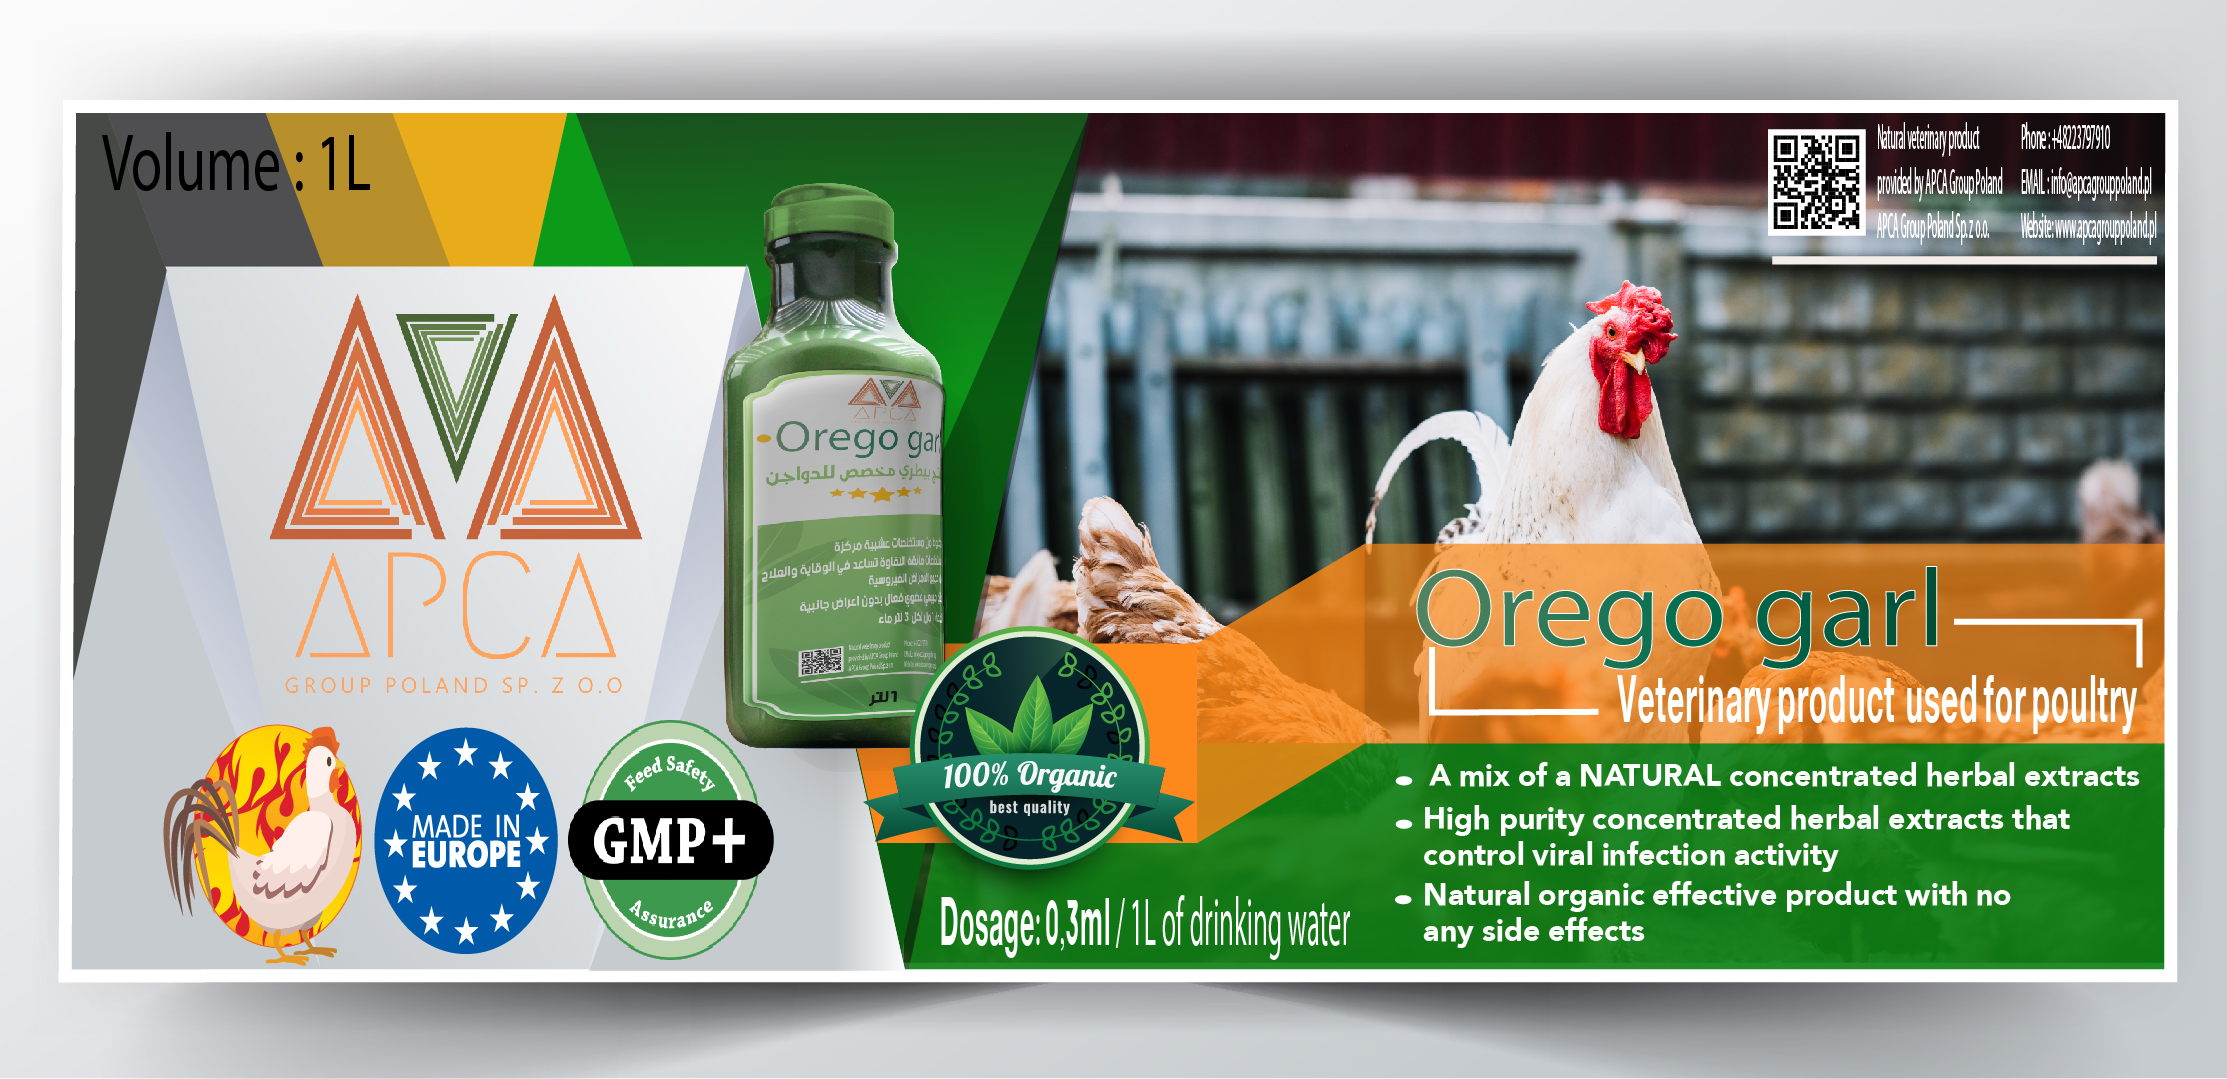 apca group poland -- export veterinary products -- orego garl